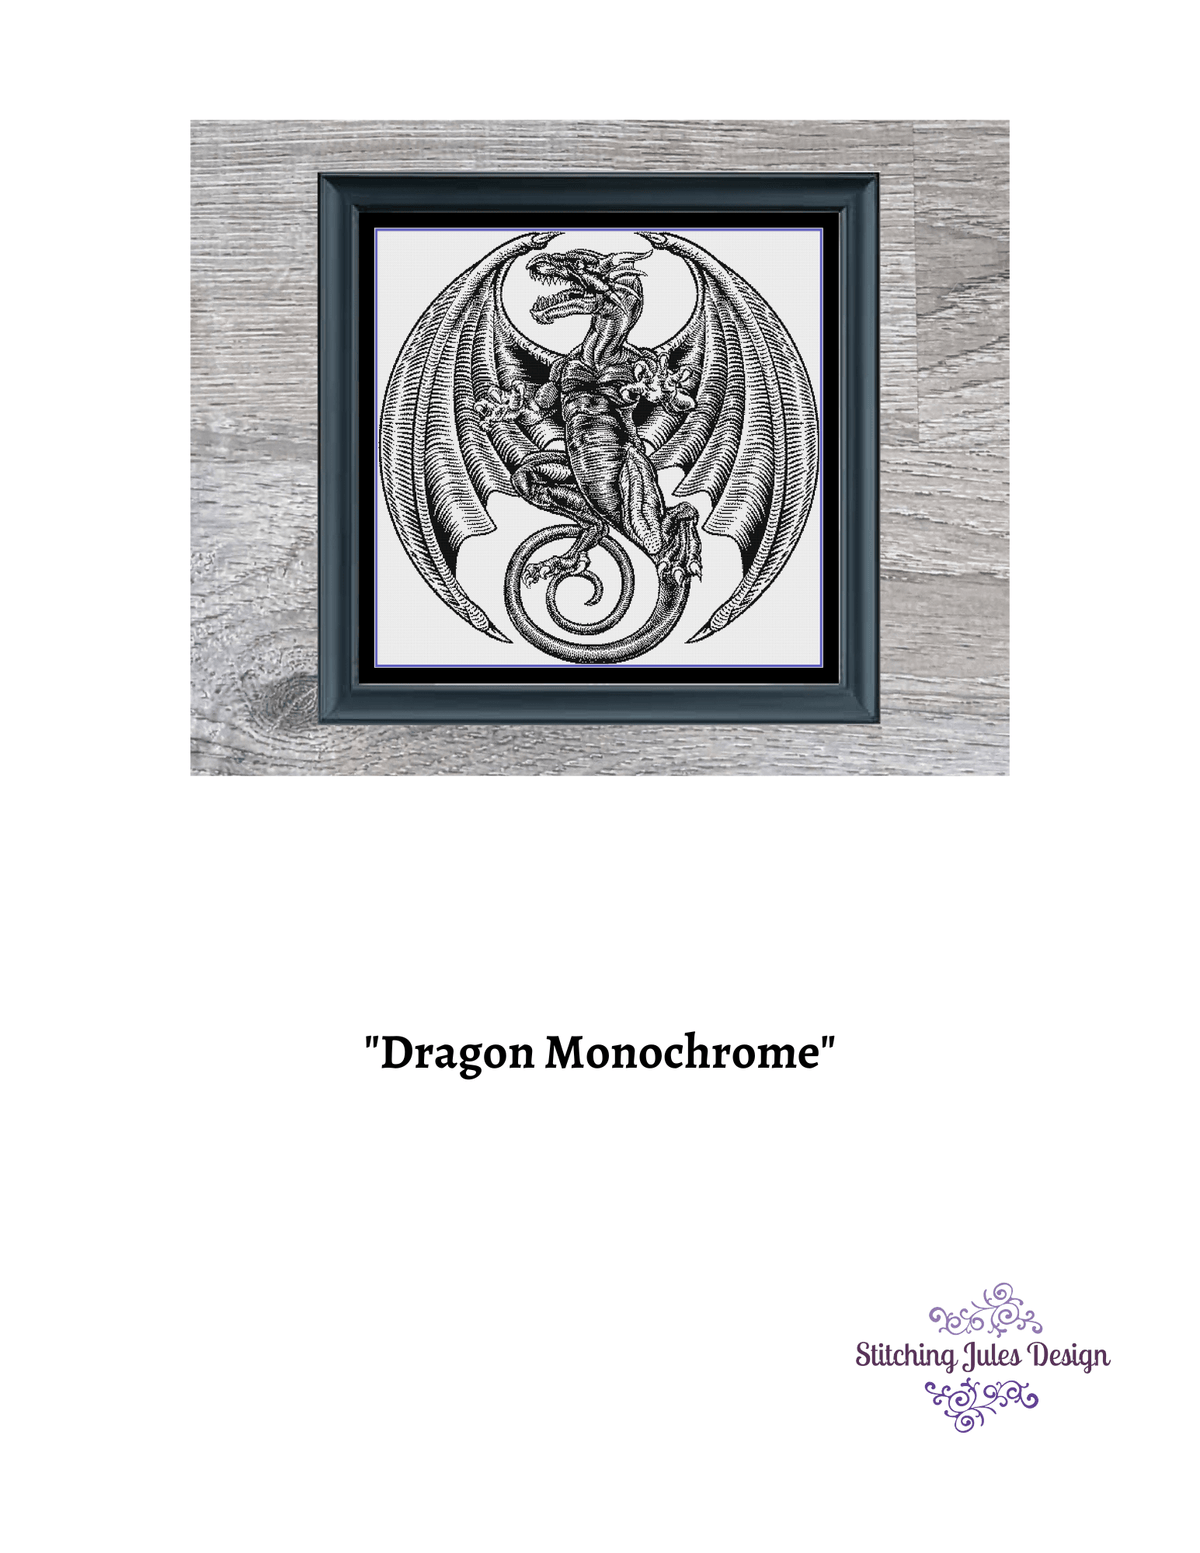 Stitching Jules Design Cross Stitch Pattern Dragon Cross Stitch Pattern | Fantasy Cross Stitch Pattern | Blackwork | Instant PDF Download And Physical Pattern Options